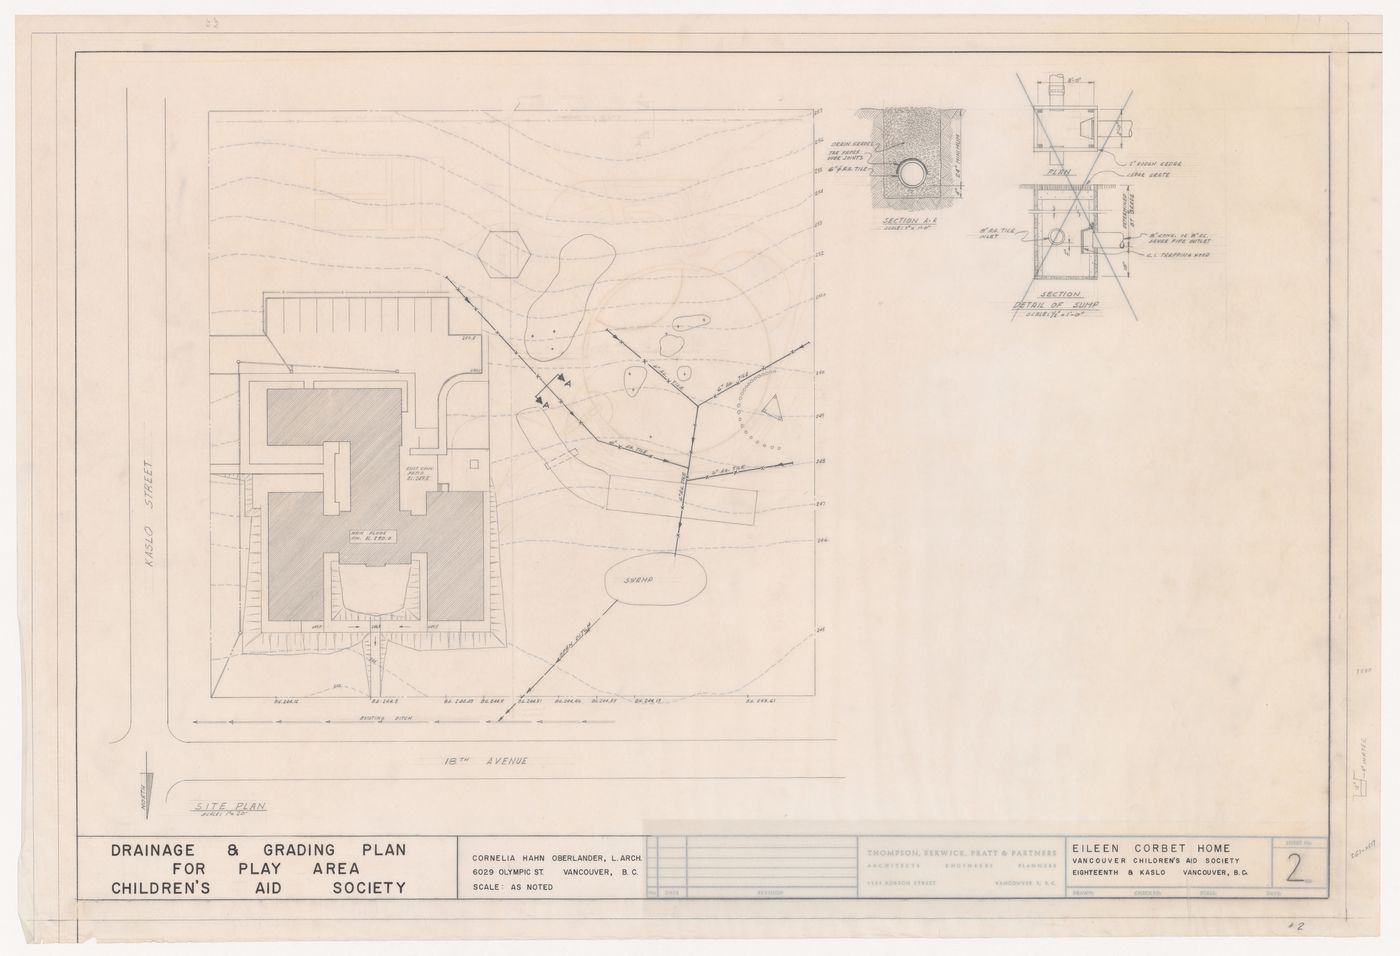 Drainage and grading plan for play area for Eileen Colbert Home, Vancouver, British Columbia